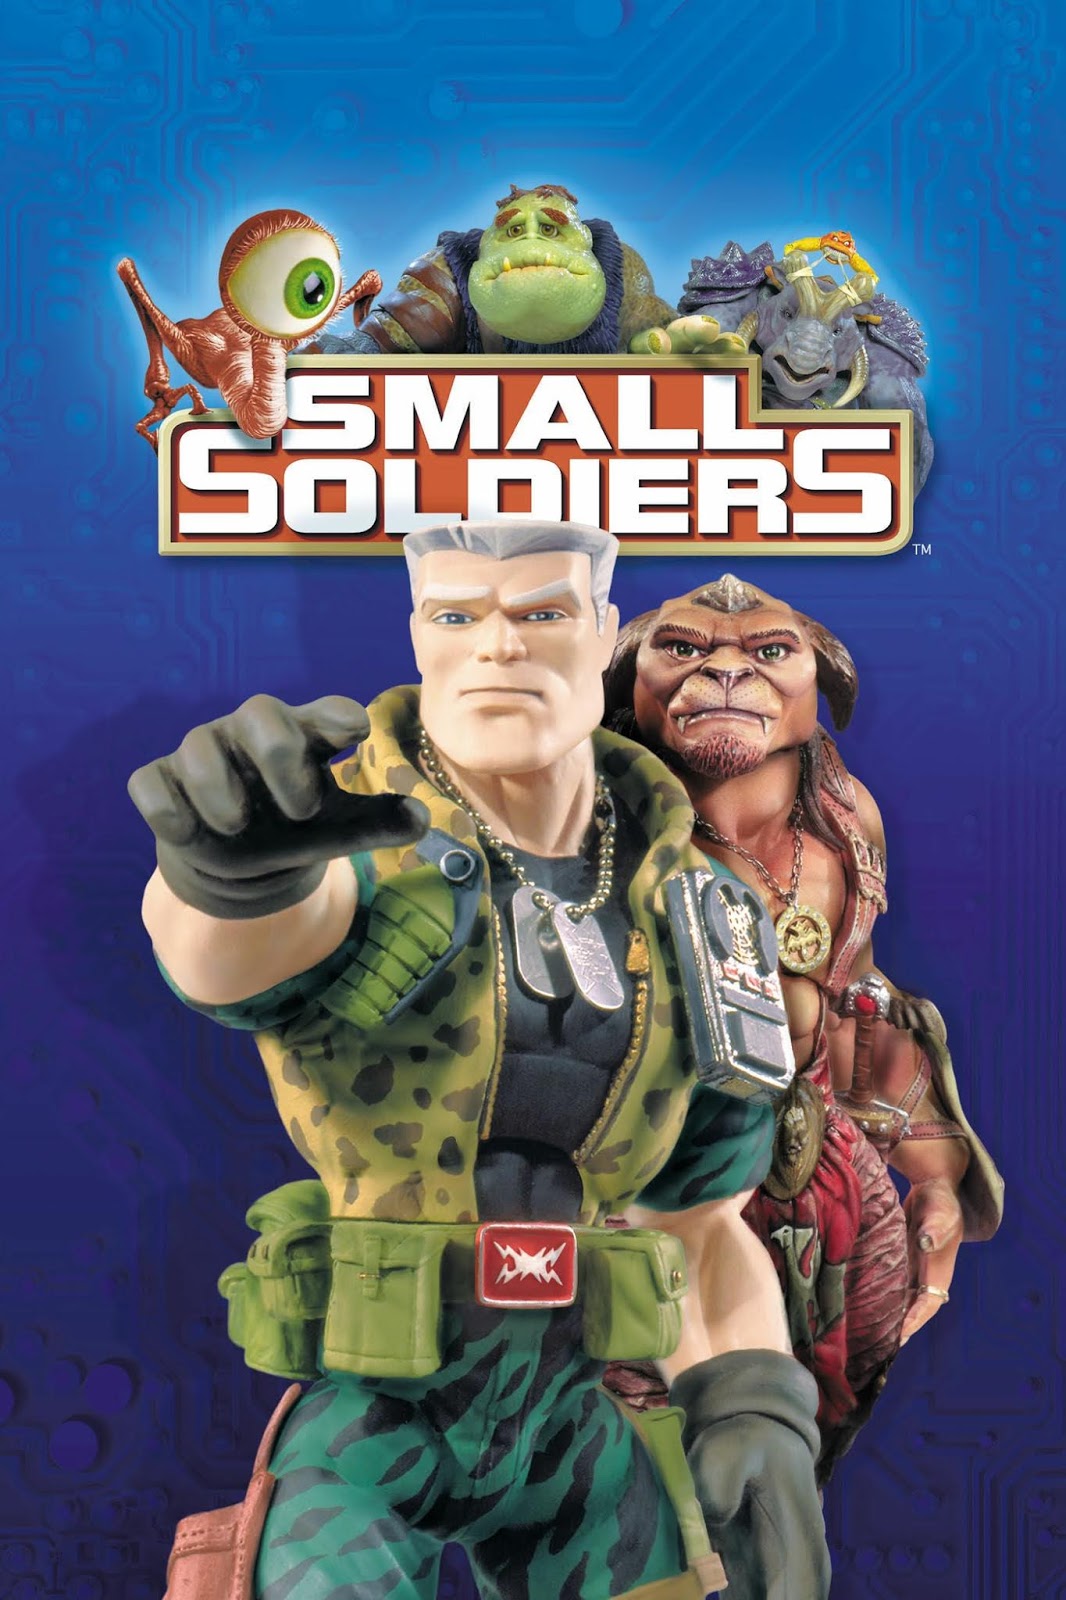 Just Screenshots: Small Soldiers (1998)